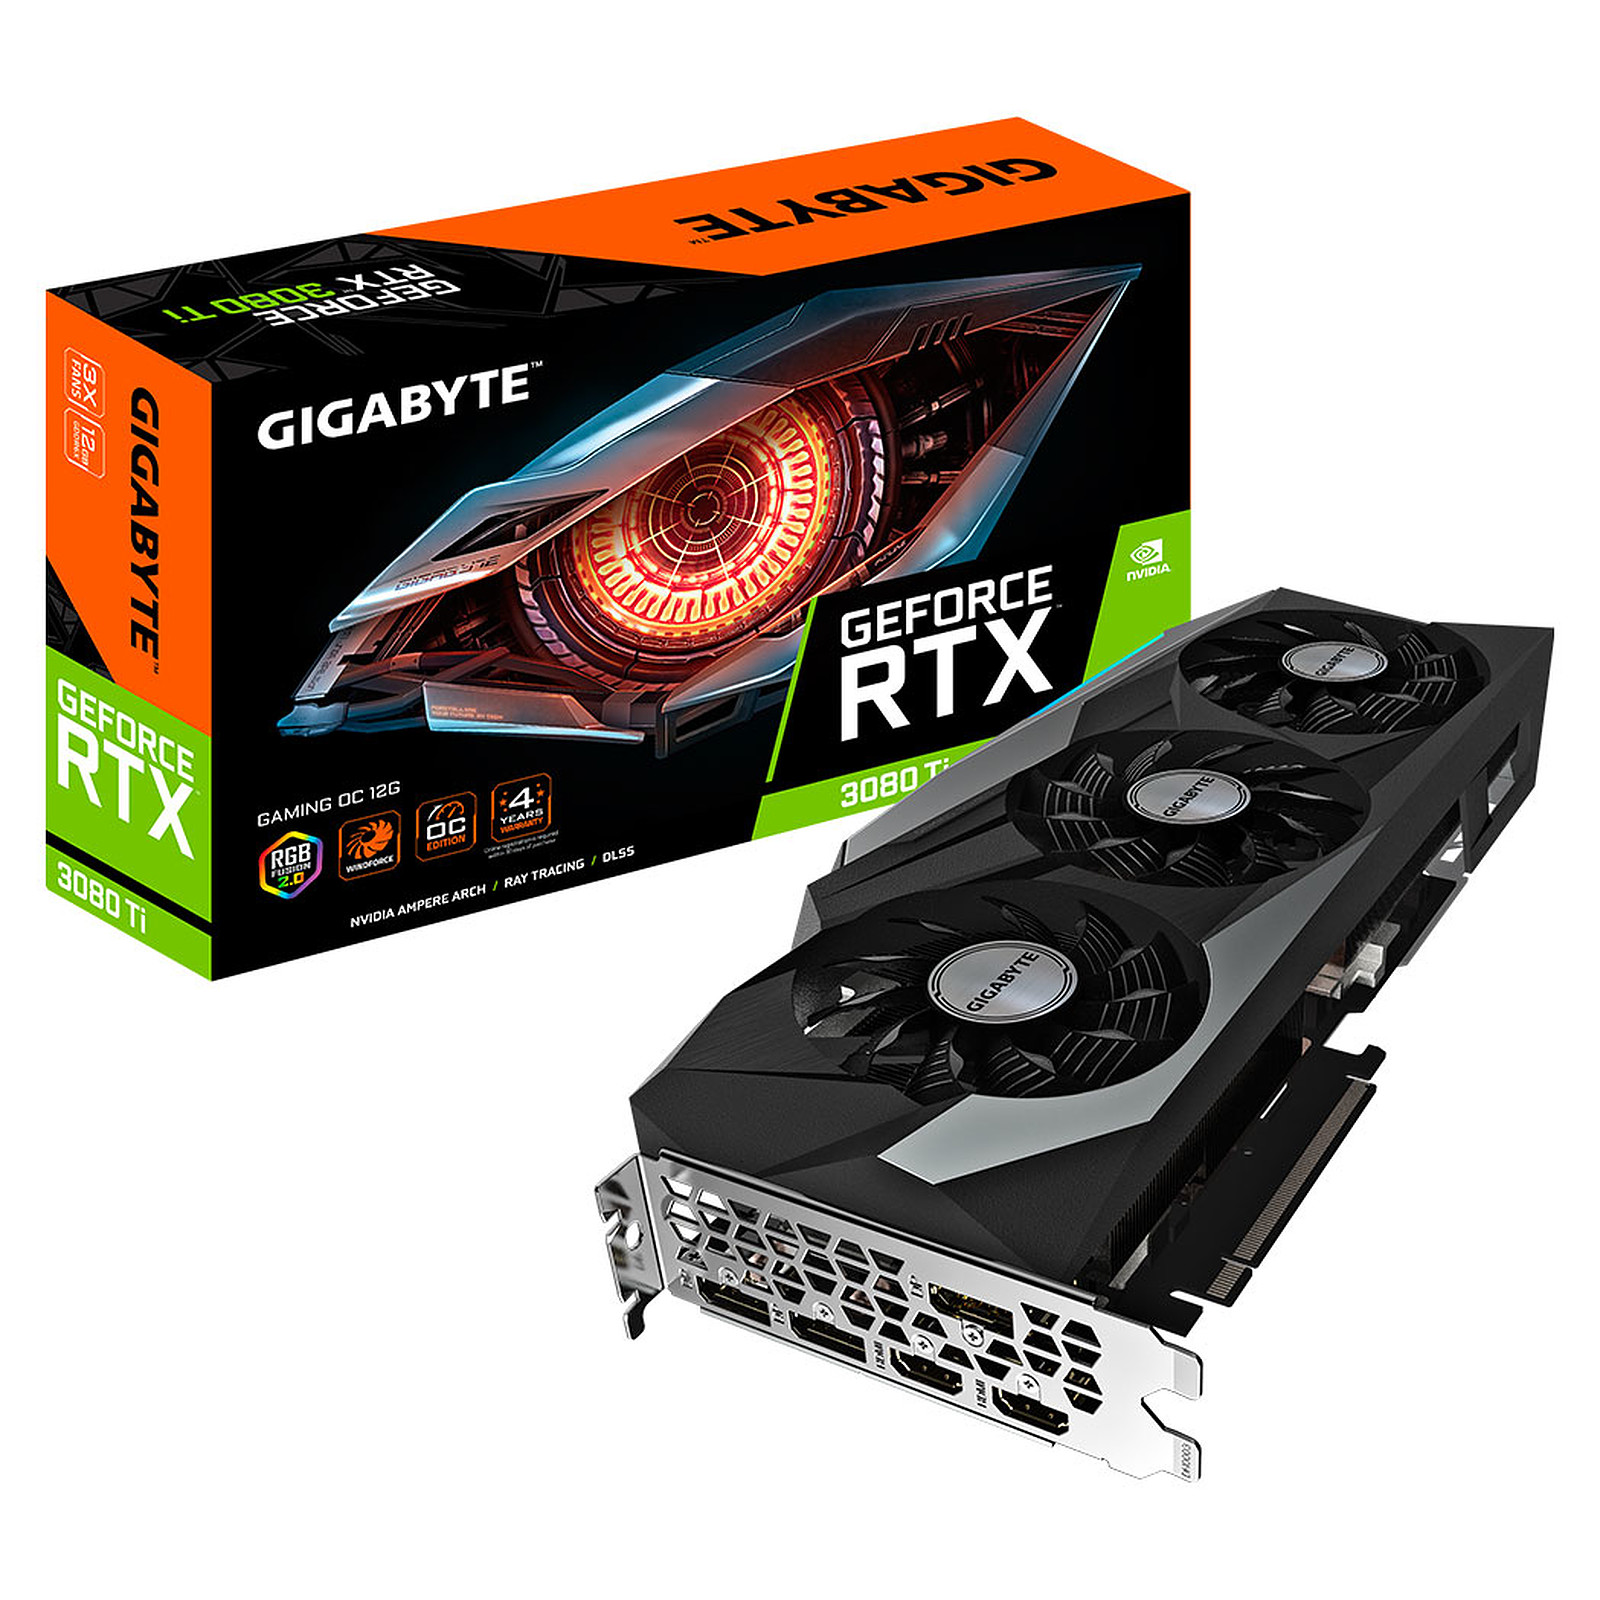 Gigabyte GeForce RTX 3080 Ti GAMING OC 12G · Occasion - Carte graphique Gigabyte - Occasion